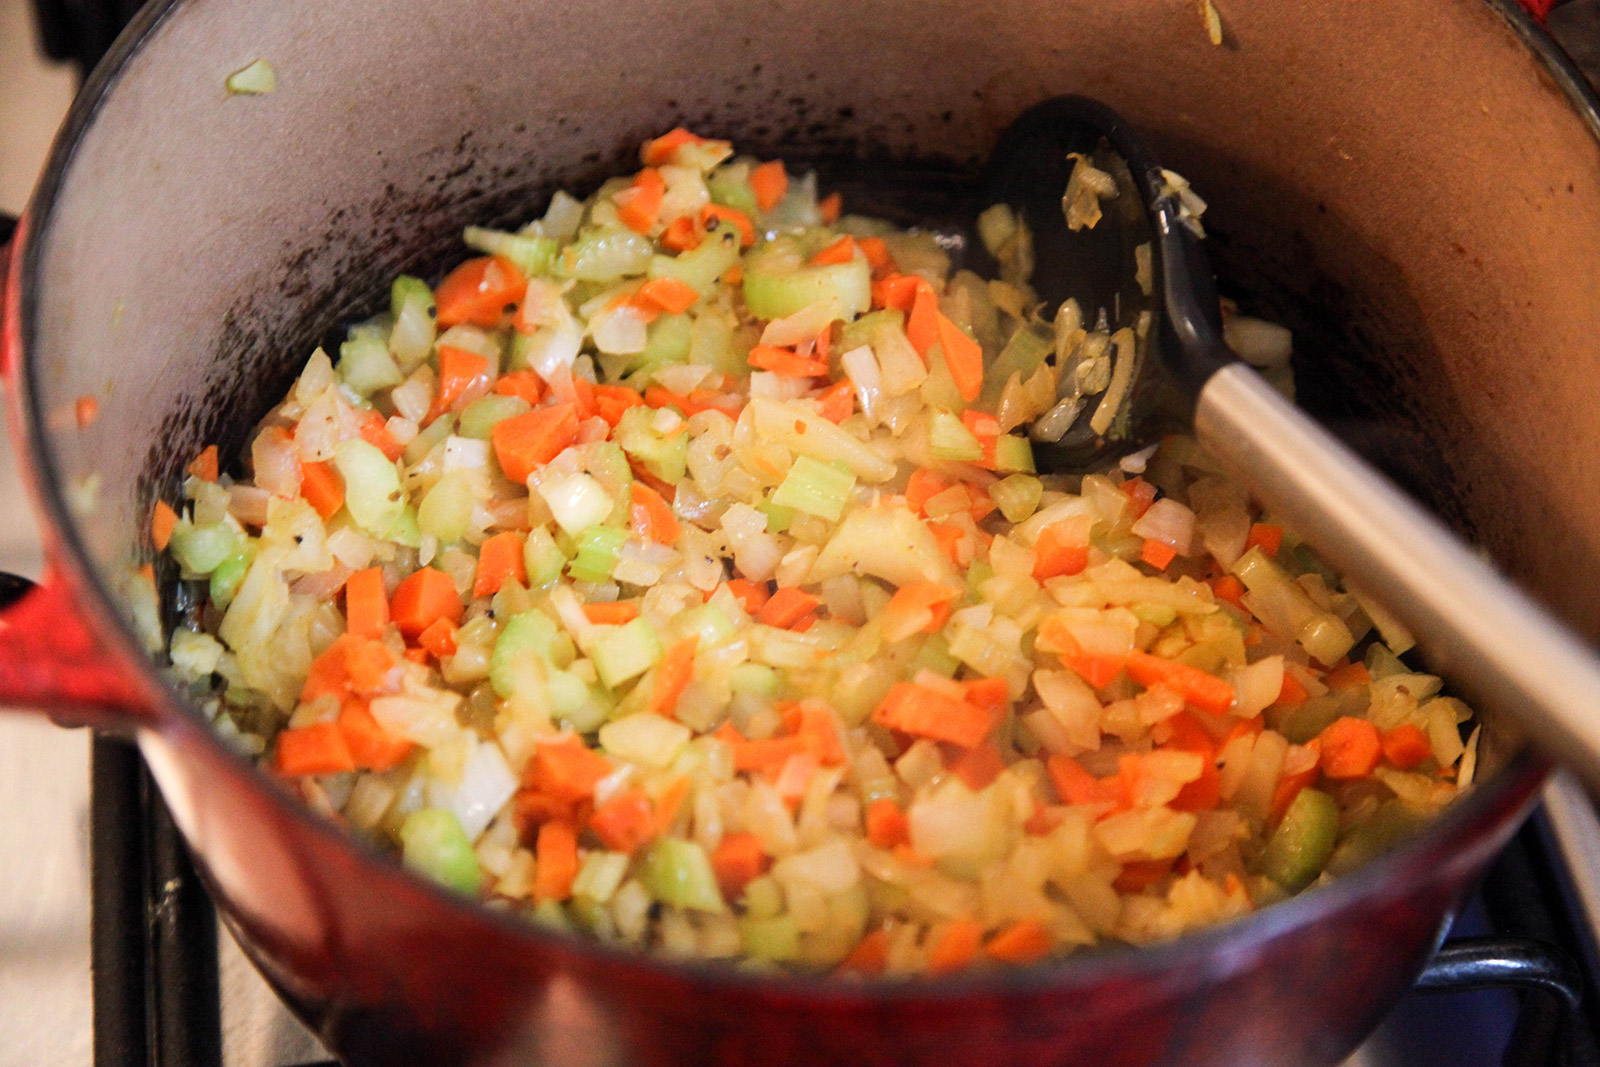 cooking onions, carrots, celery for Braised Short Ribs